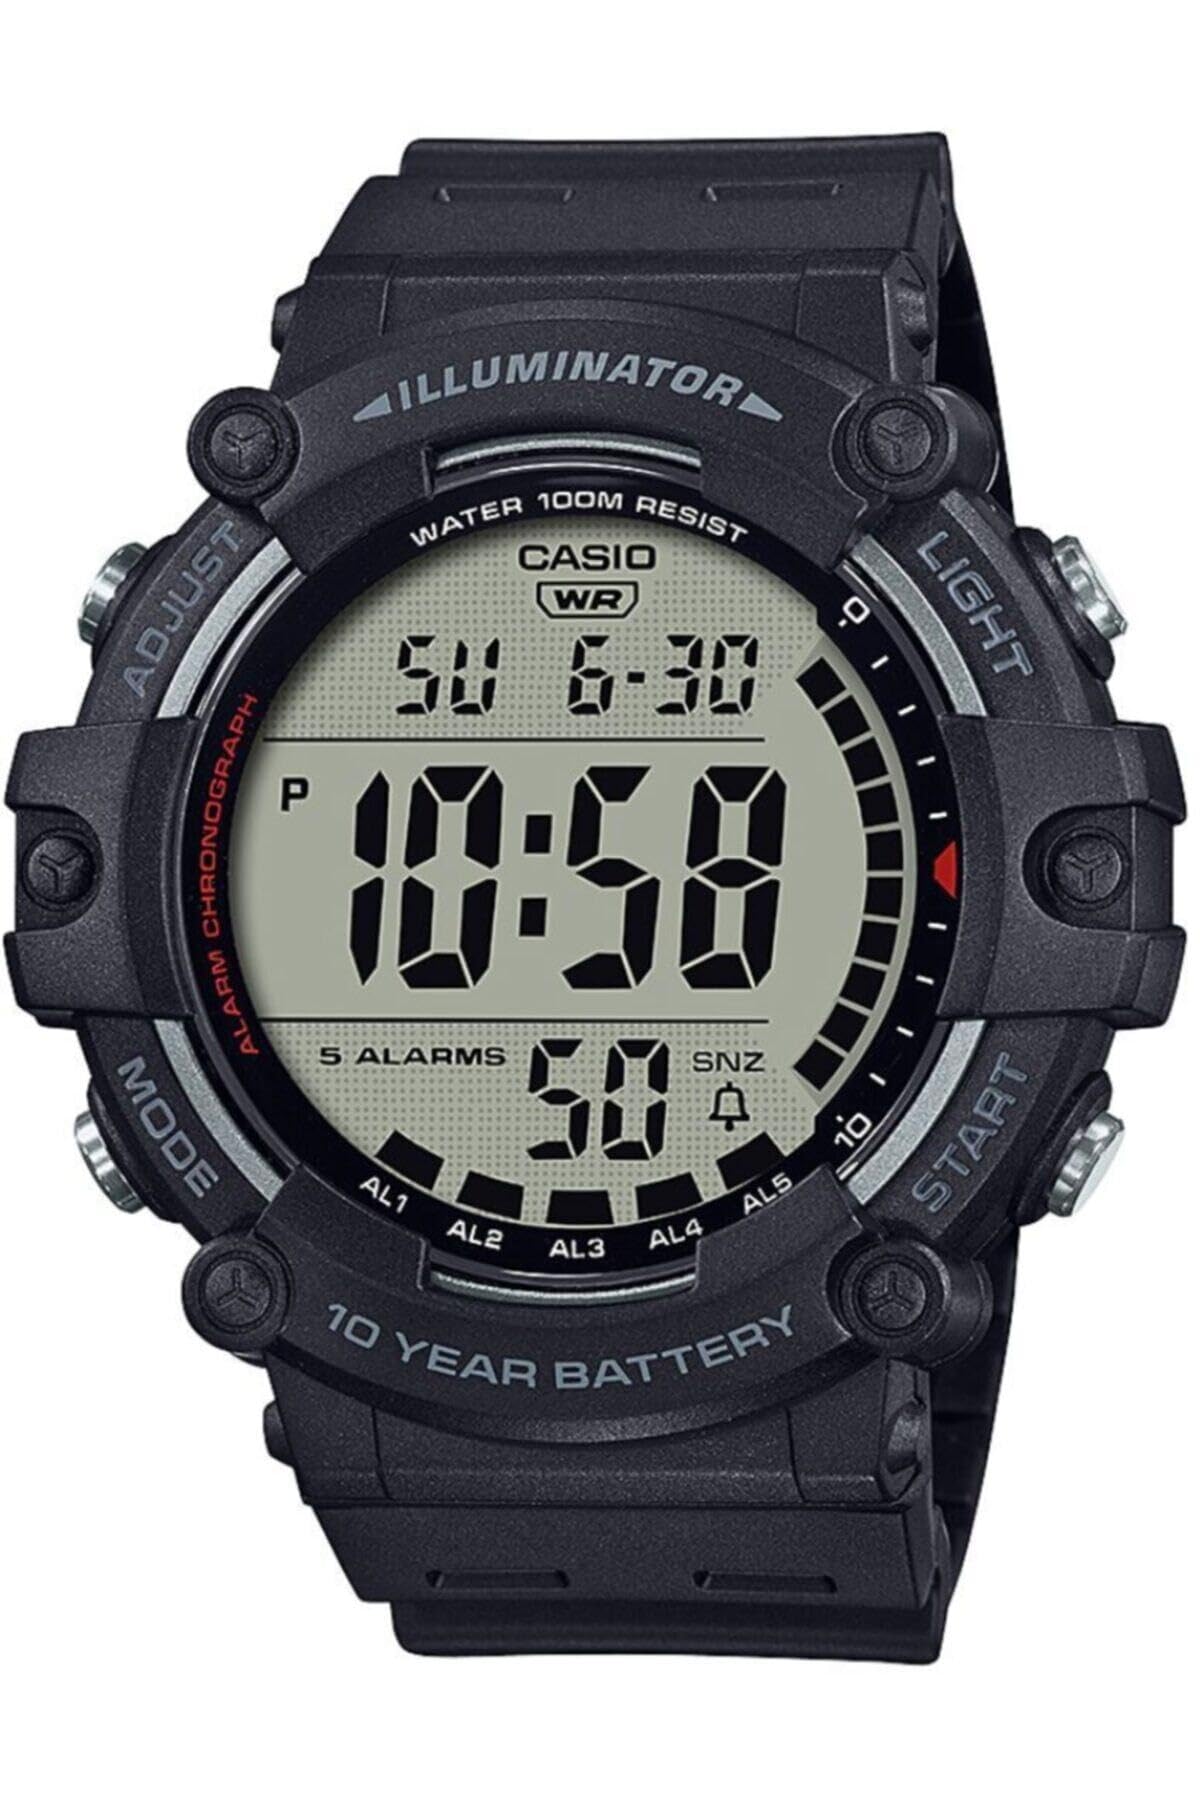 Casio Resin Digital Rubber Black Dial and Band Men's Watch-Ae-1500Wh-1Avdf